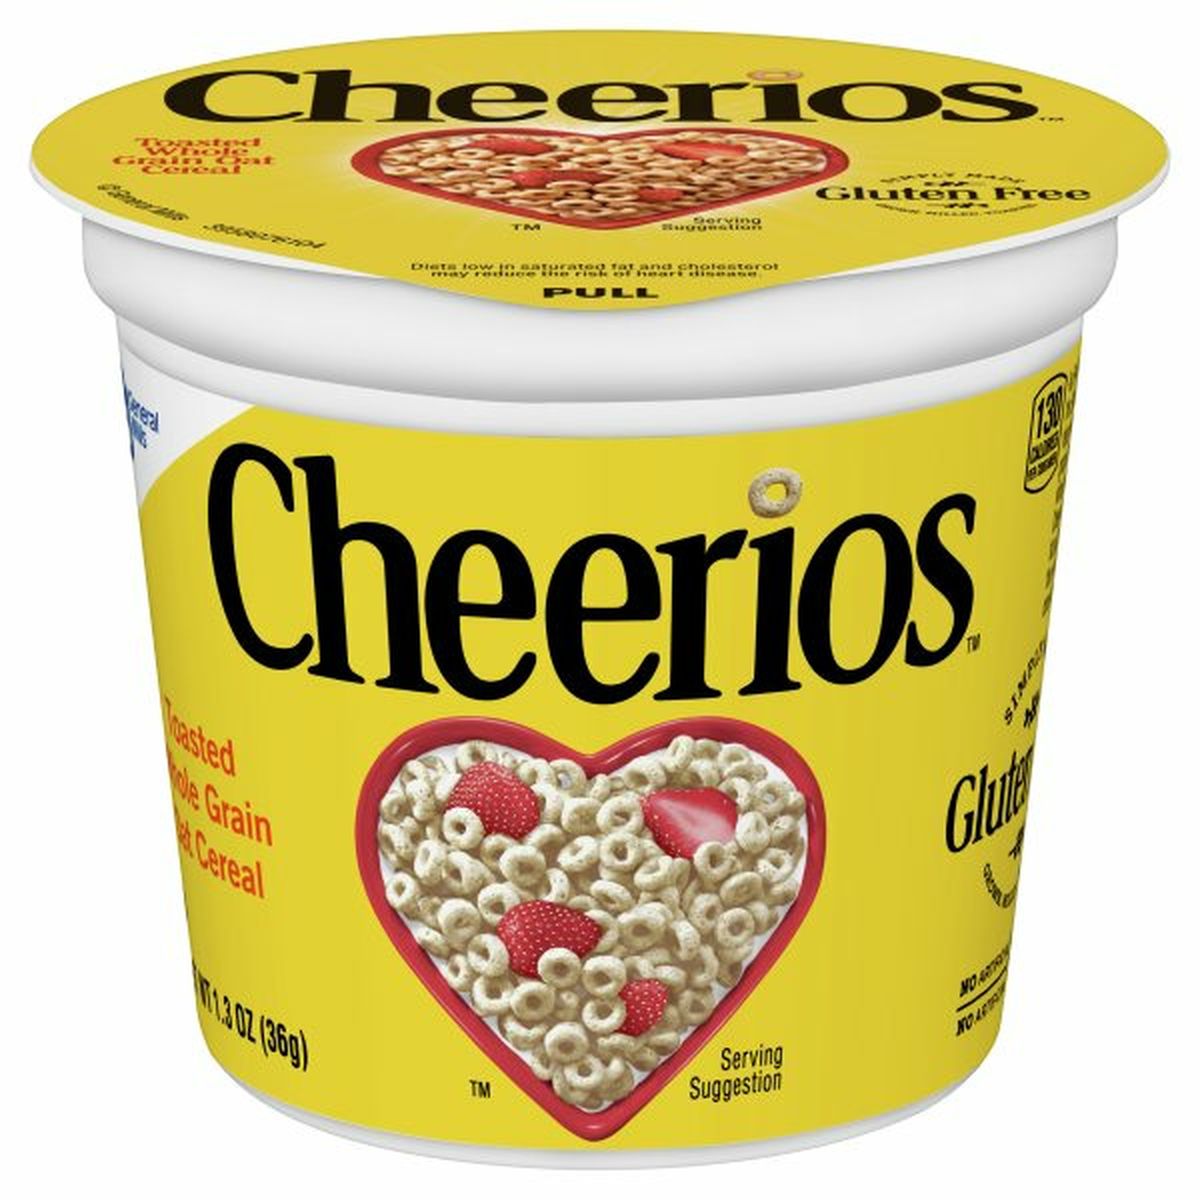 Calories in Cheerios Cereal, Gluten Free, Whole Grain Oat, Toasted